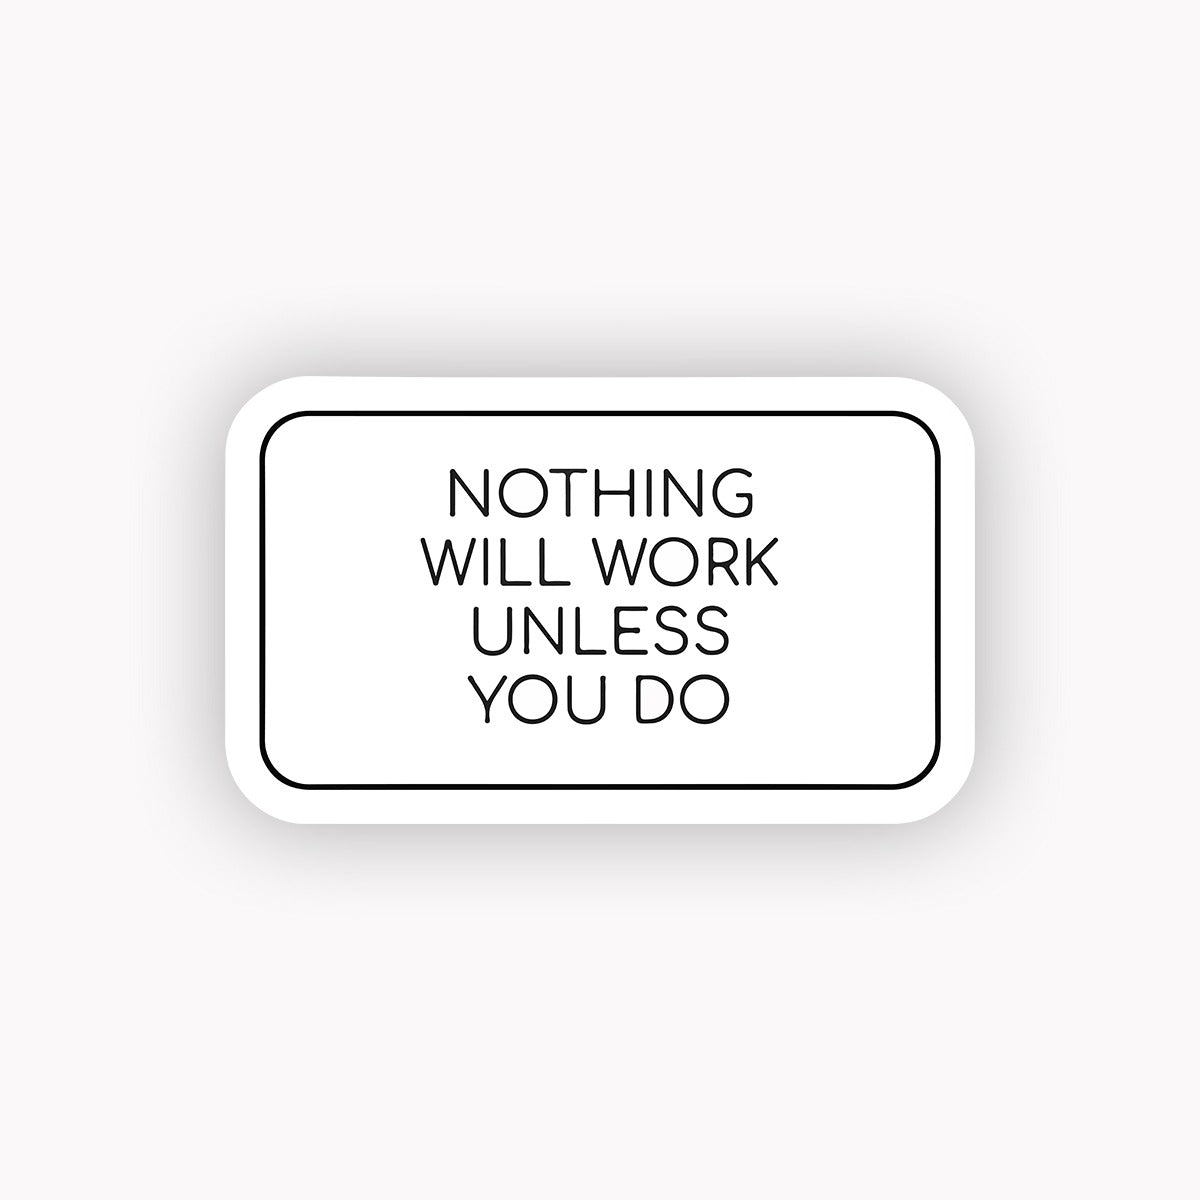 Nothing will work unless you do